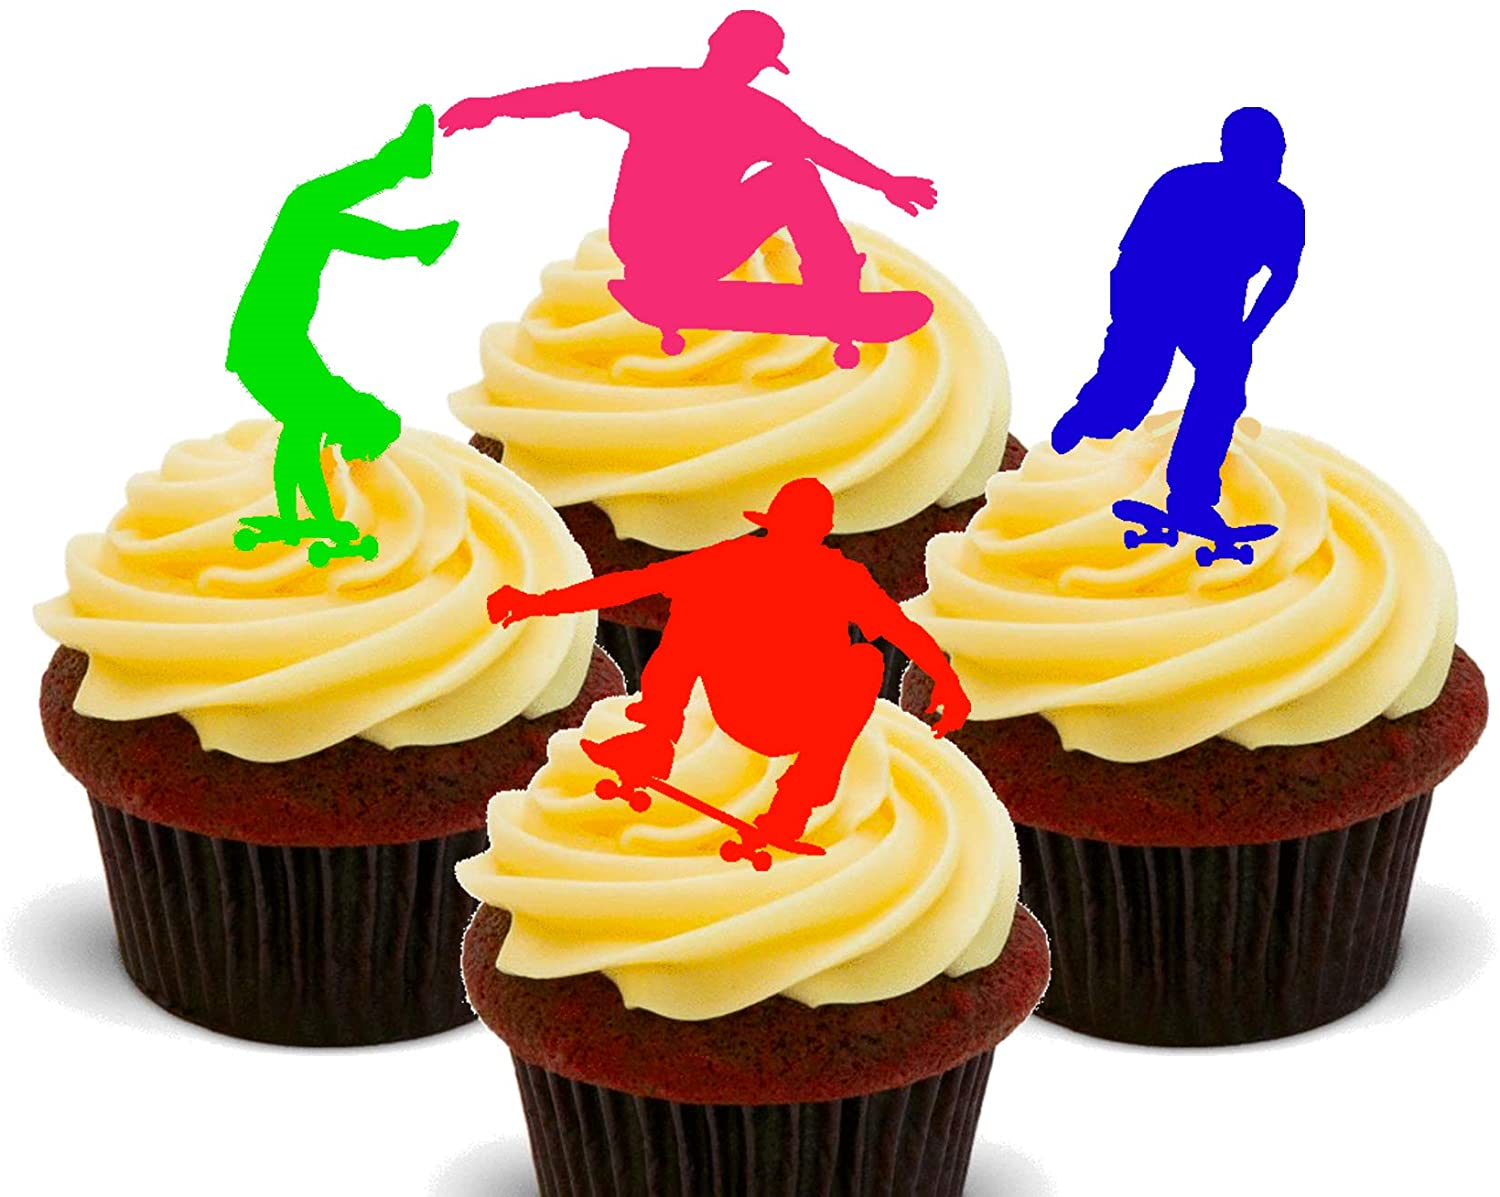 Skate Board Theme Cupcakes - Pack of 6